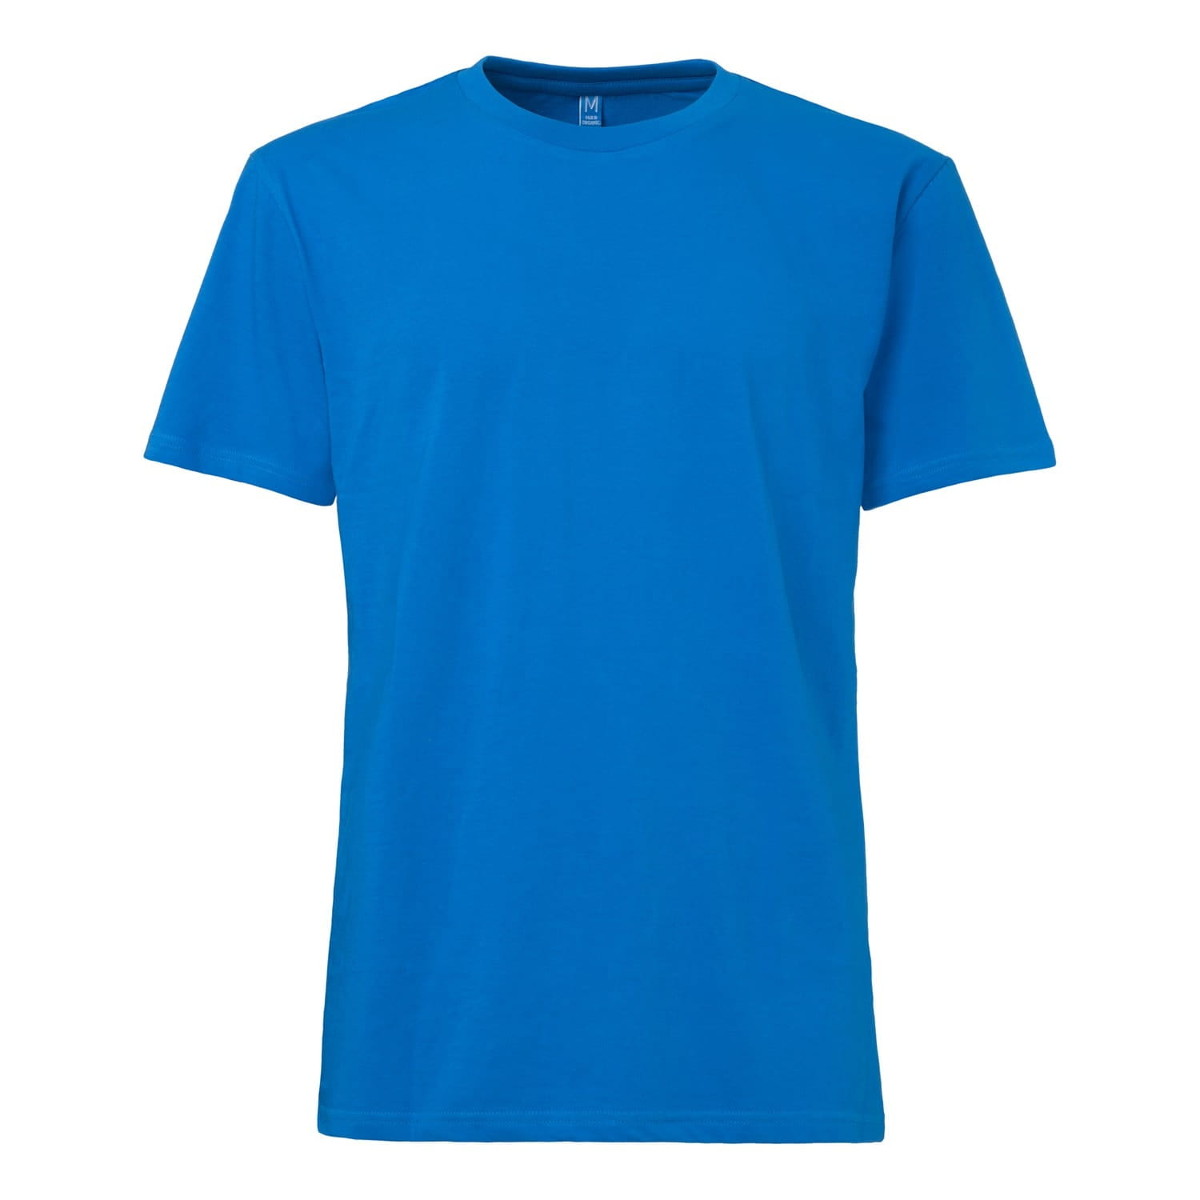 Clothing :: Tops :: T-shirt, Color: Blue